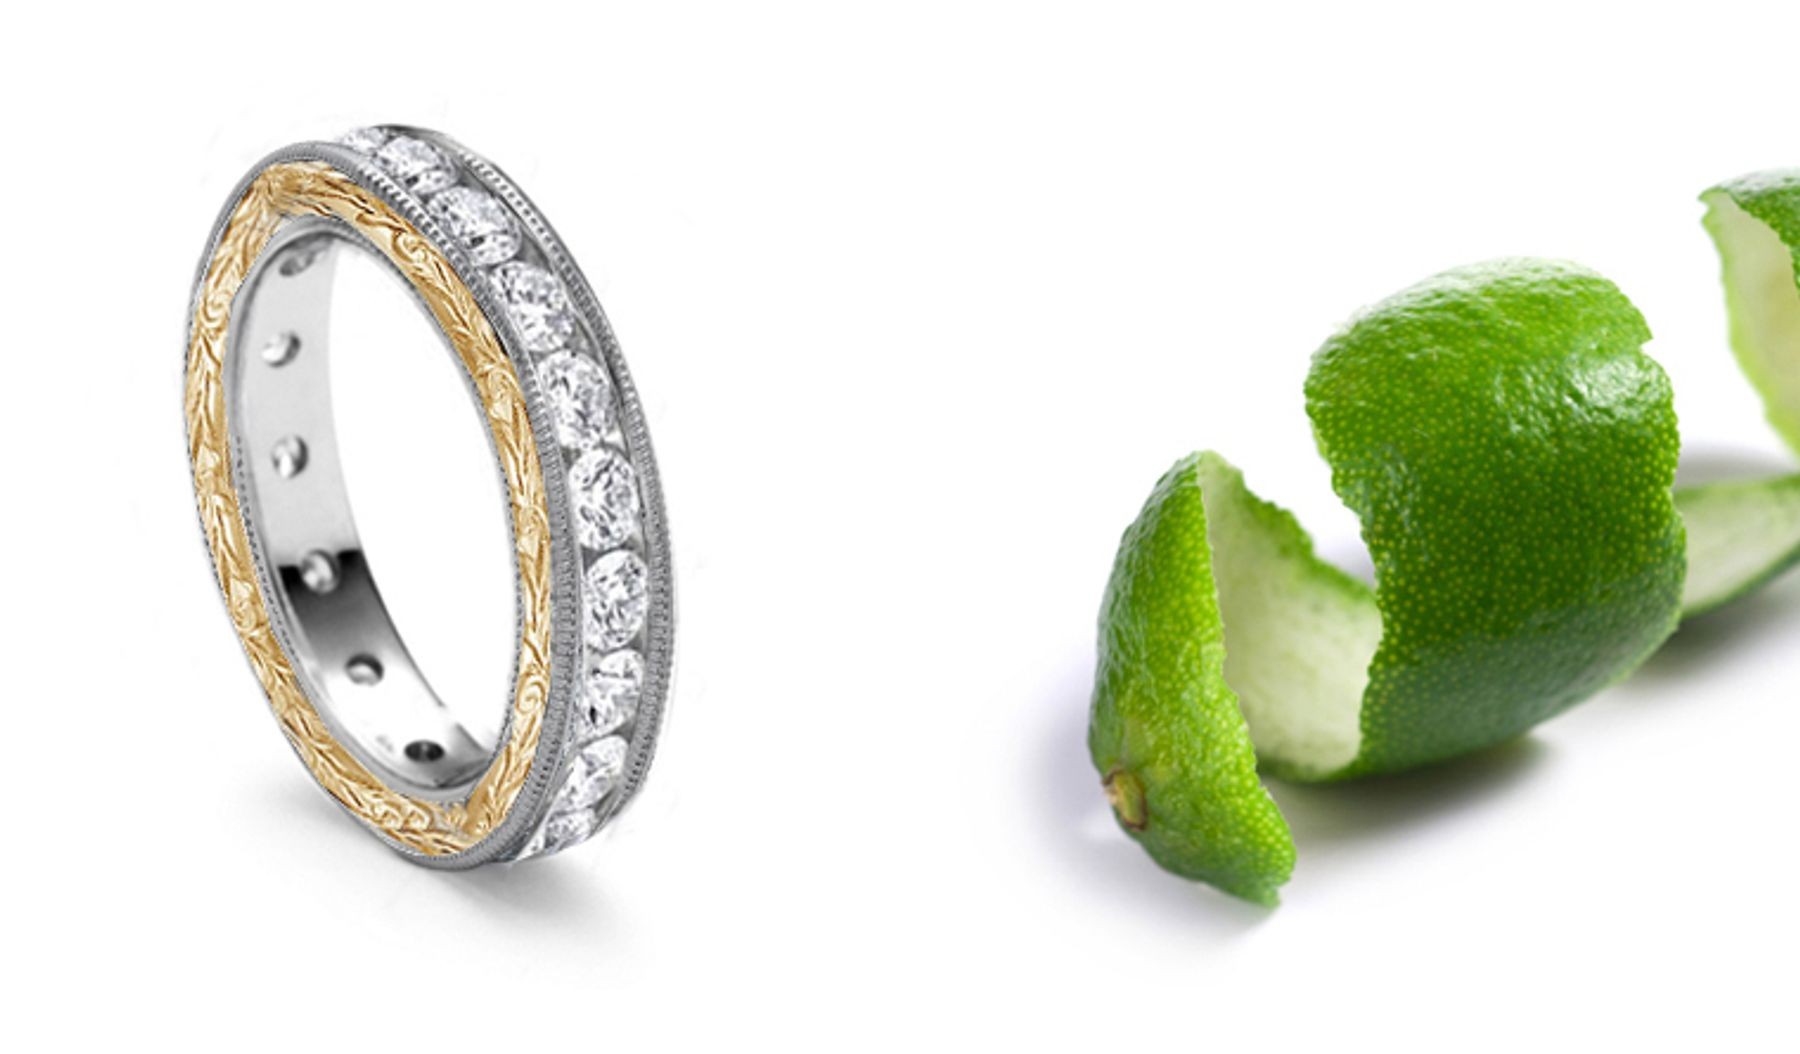 Search For Beauty: Platinum Ring Seamlessly-Set, Perfectly-Matched, Channels of Round Cut Diamonds and Engraved Band Sides